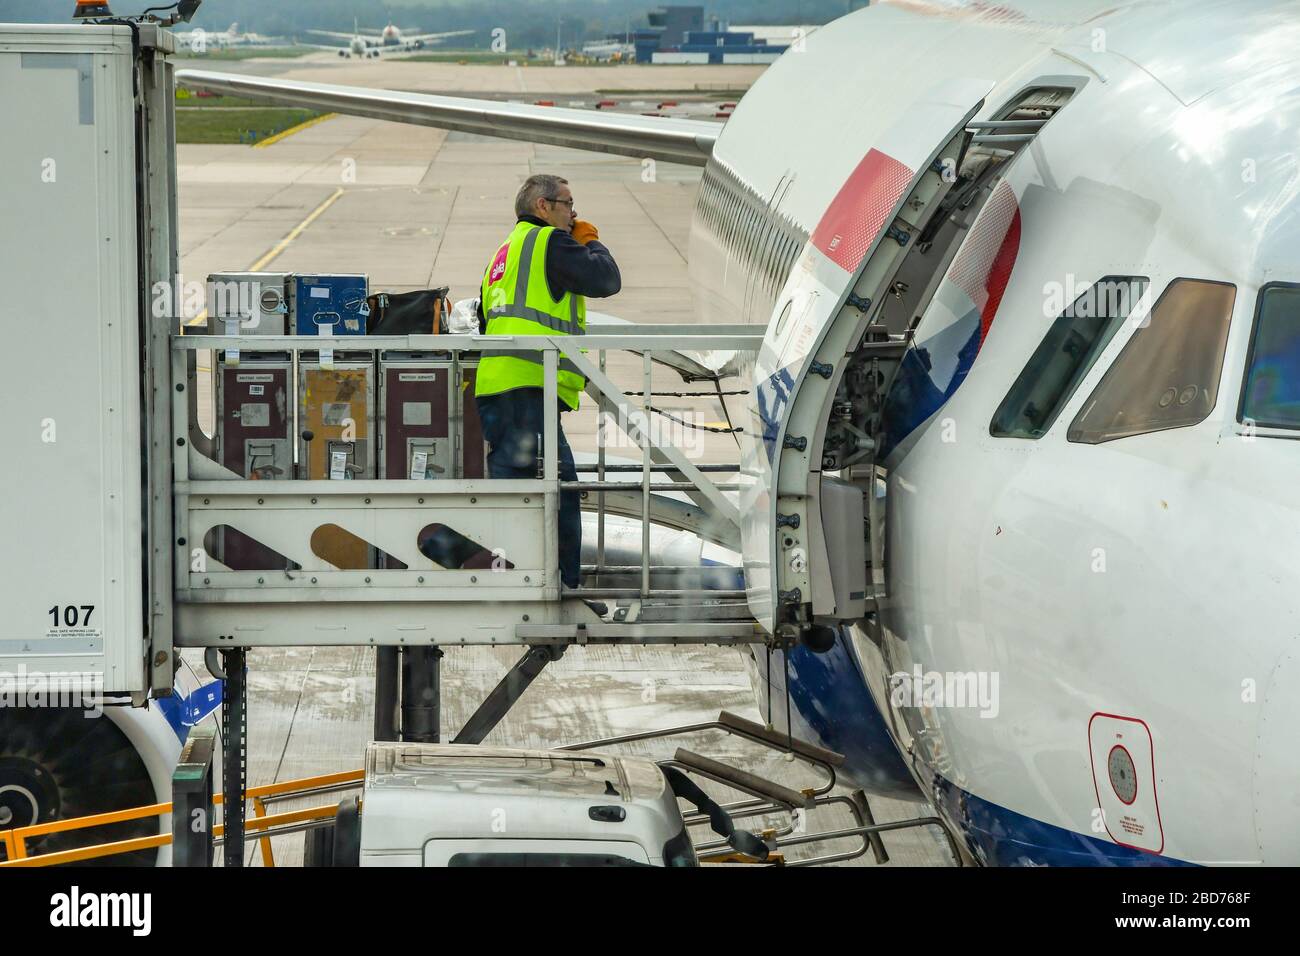 LONDON GATWICK AIRPORT, ENGLAND - APRIL 2019: Person loading a British Airways Airbus jet with in flight catering supplies at London Gatwick Airport Stock Photo